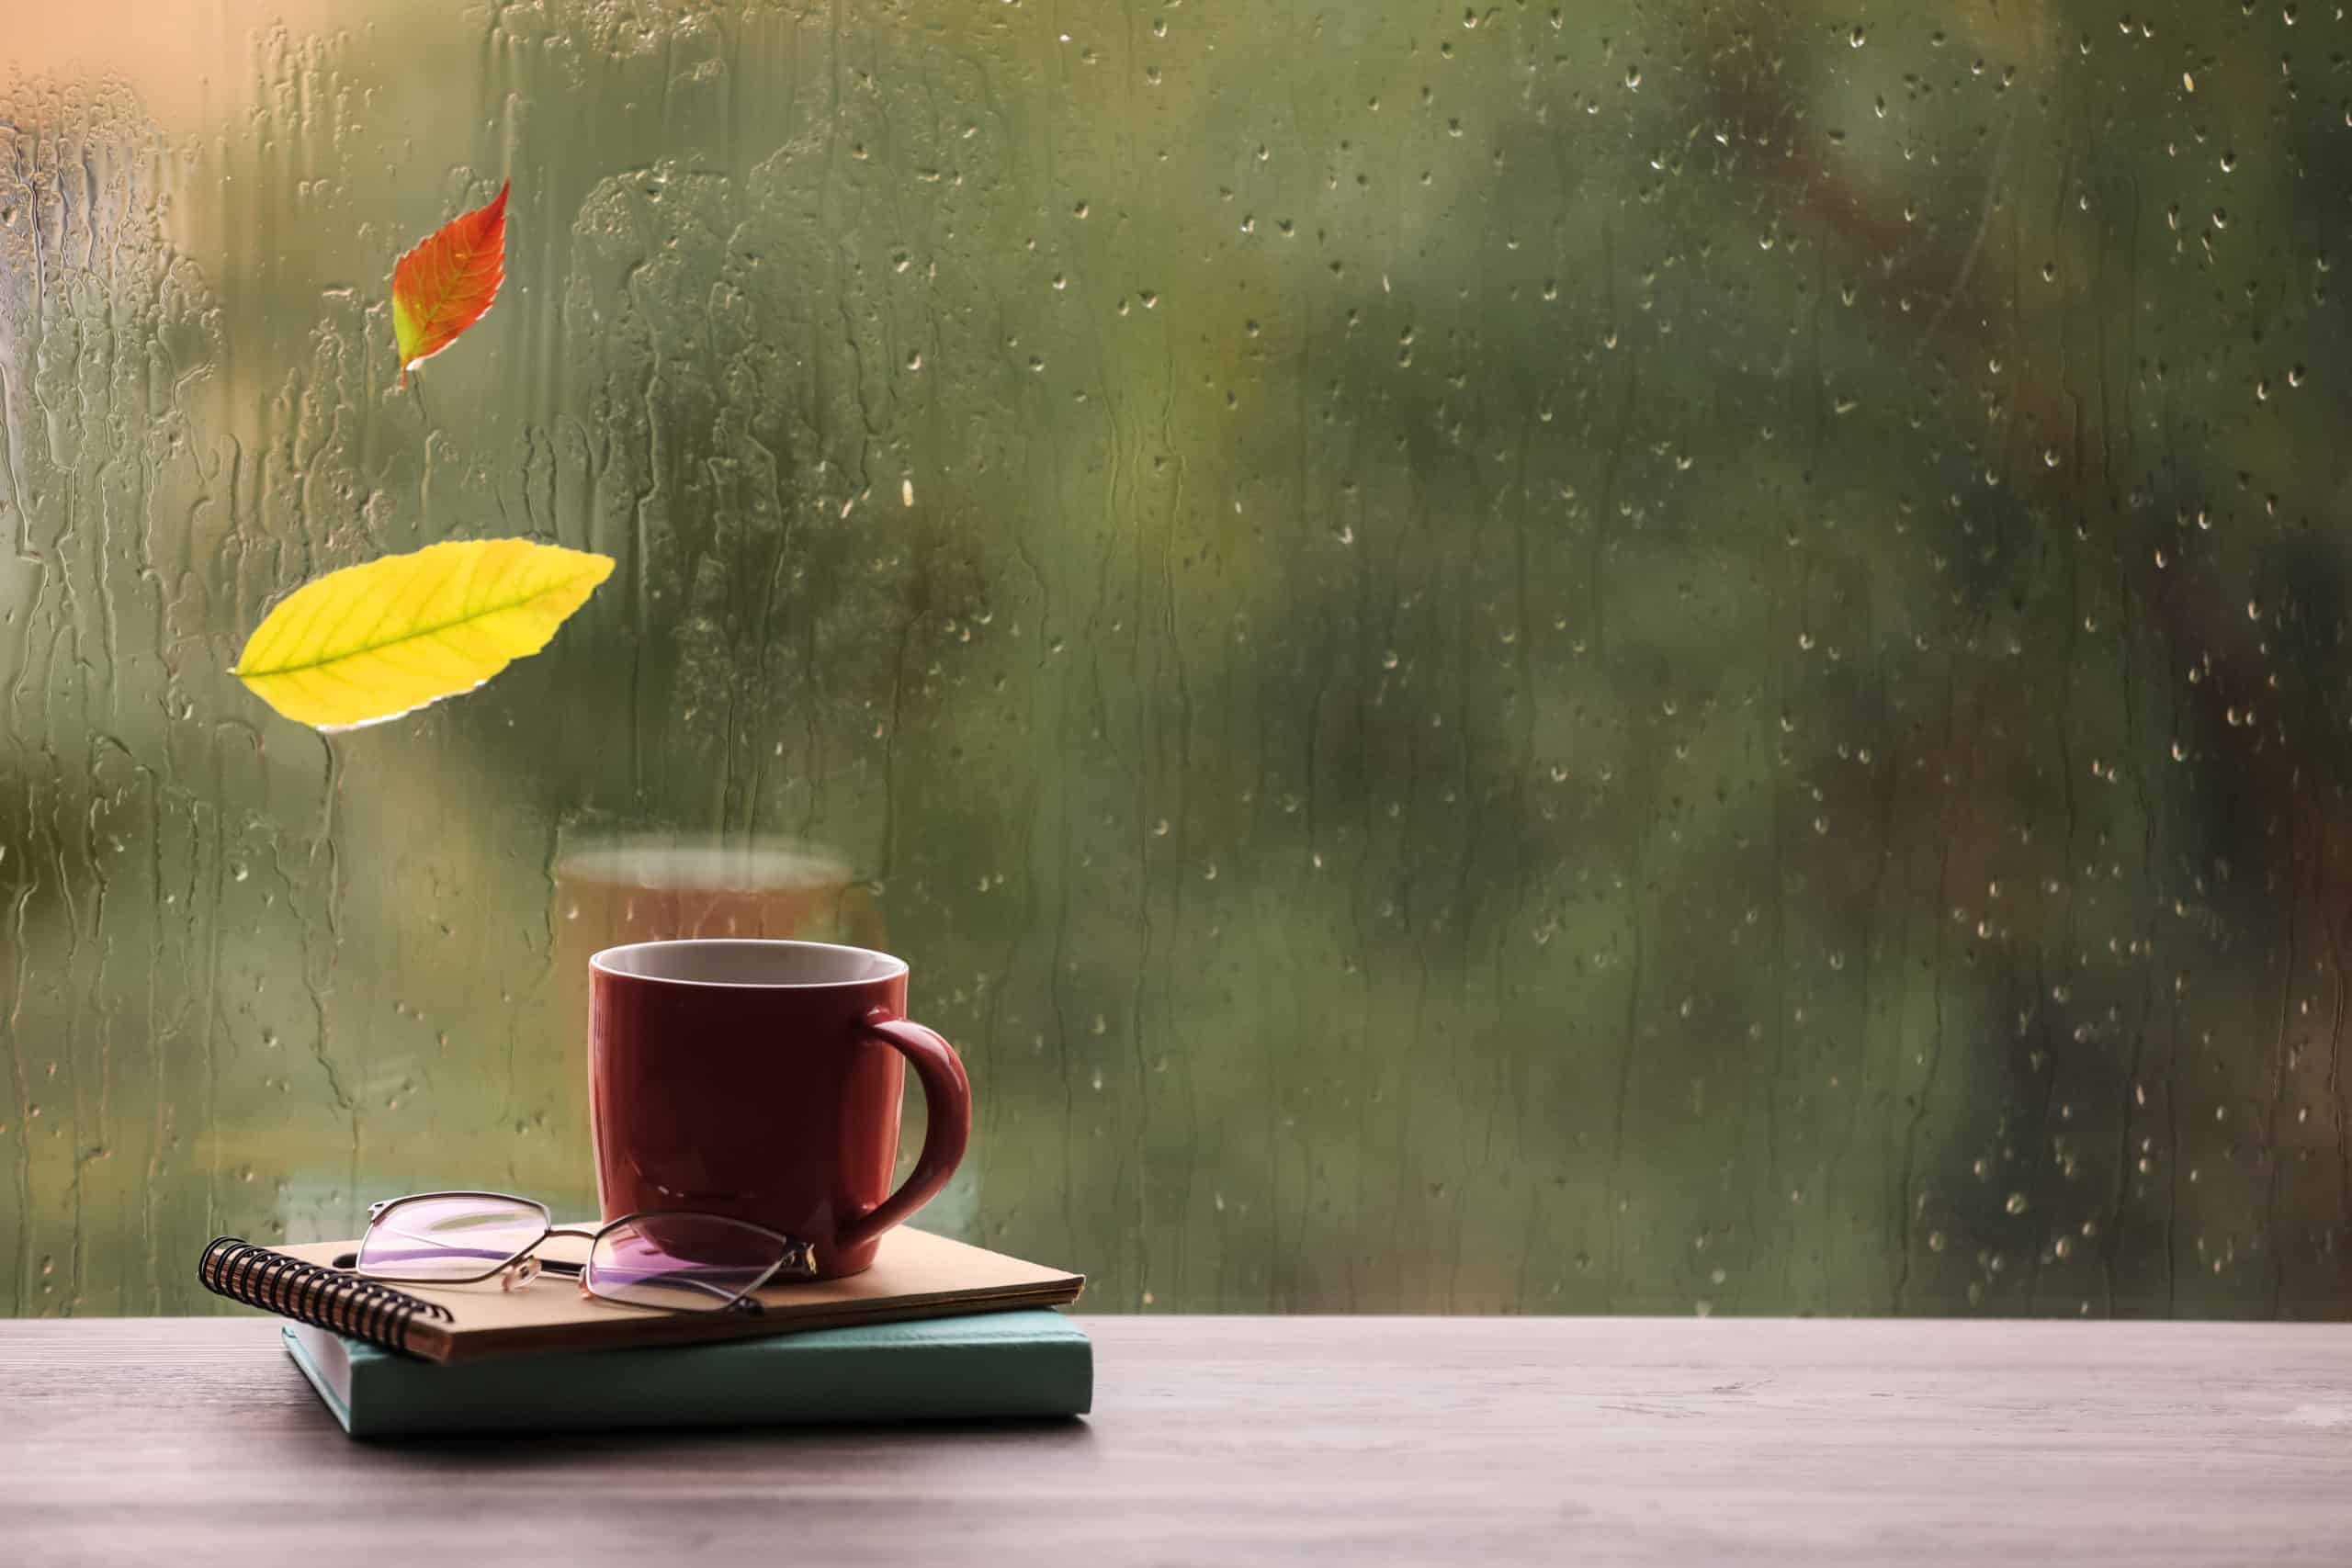 Notebook with a cup and glasses on top and autumn leave on windowsill.